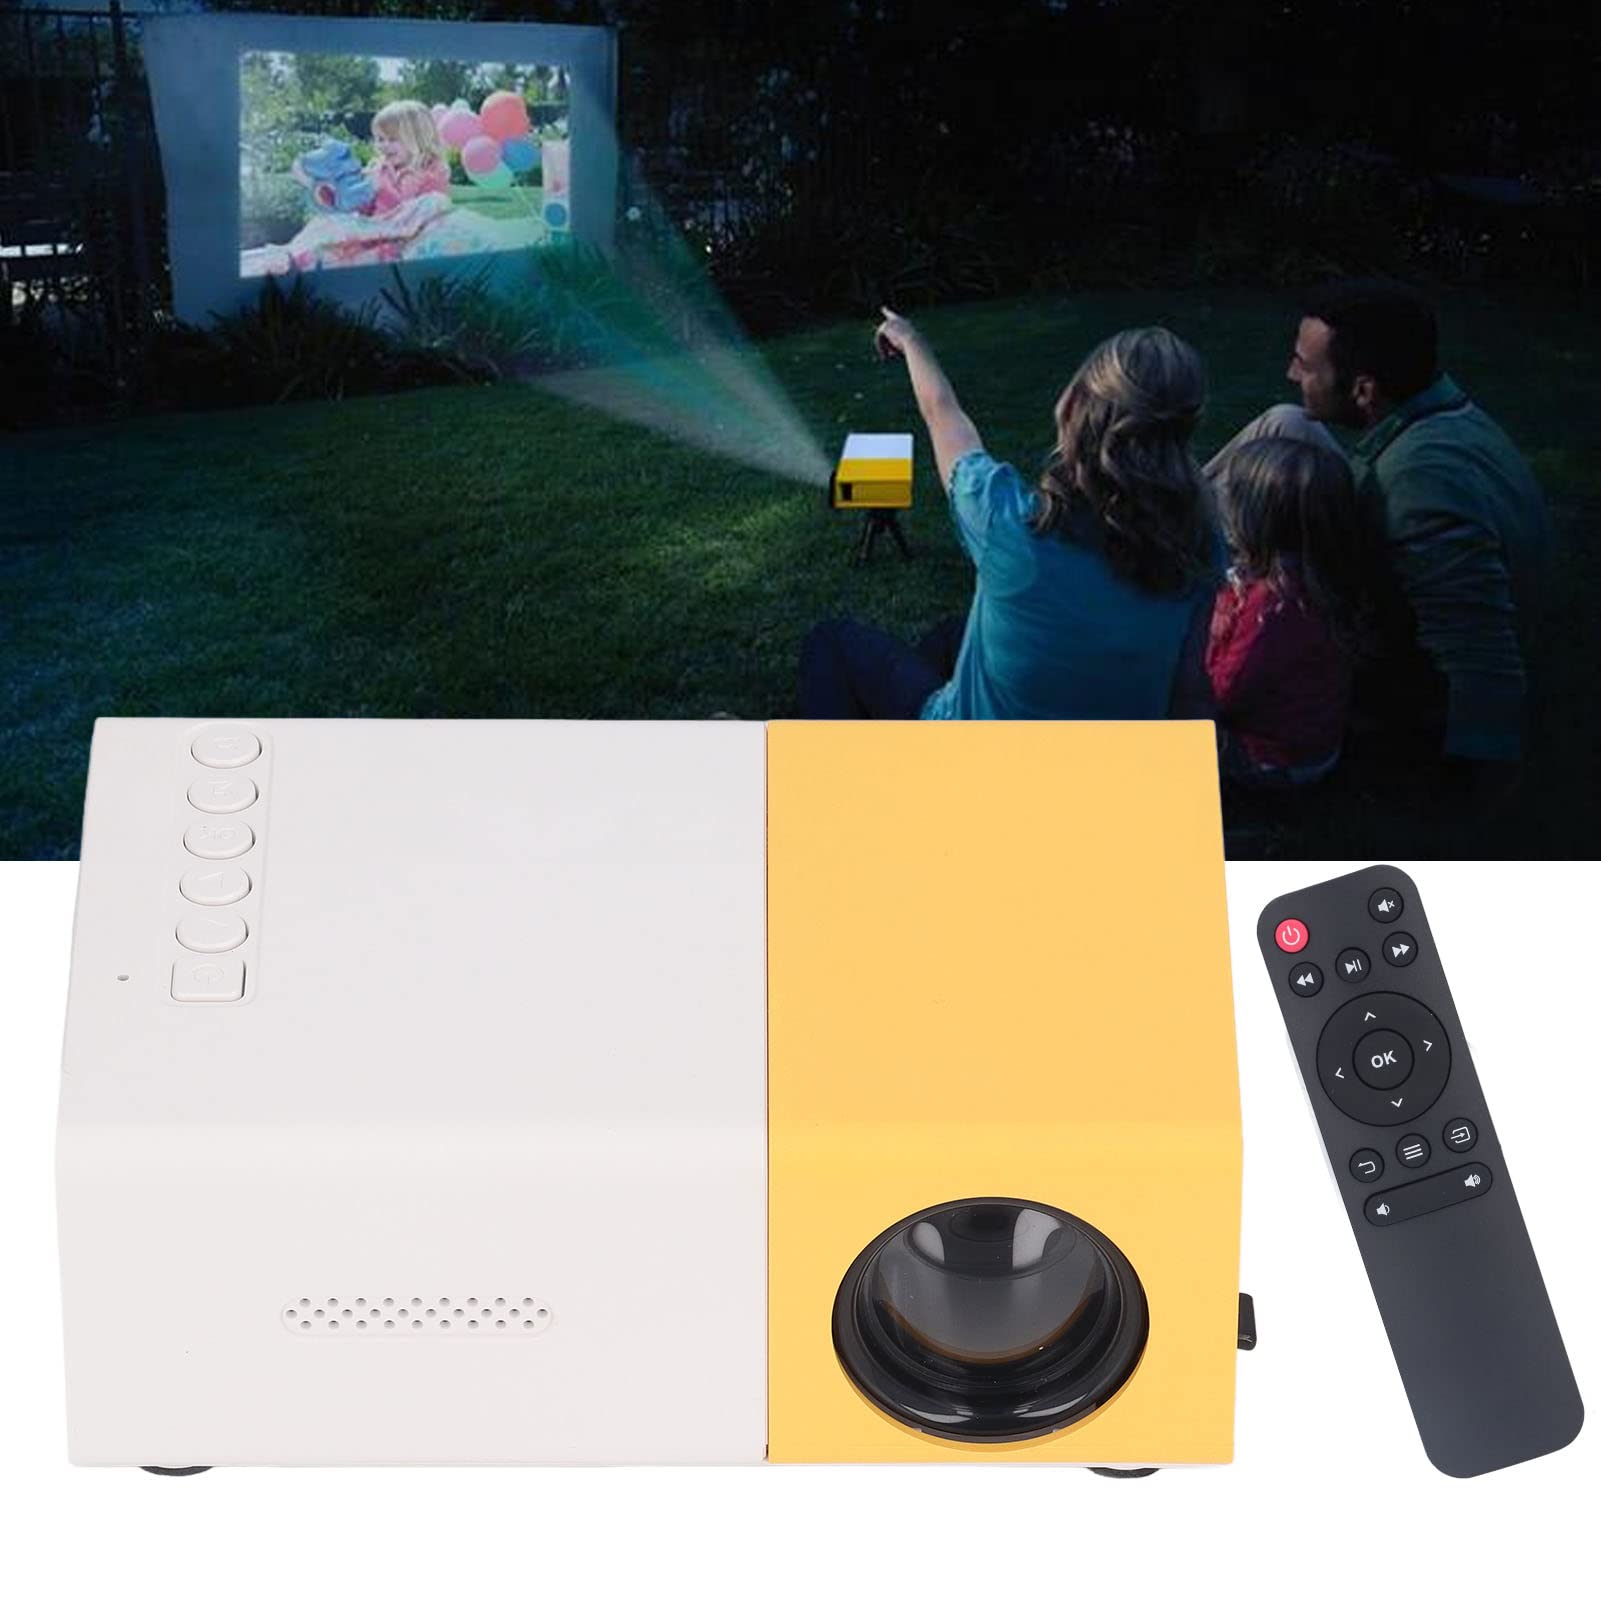 ASHATA Mini Projector,Portable Mini Home Theater Projector,24 to 60in Video Projector 1920x1080 Resolution Large Screen Projector for Home Outdoor Theater Movie,110‑240V(US)